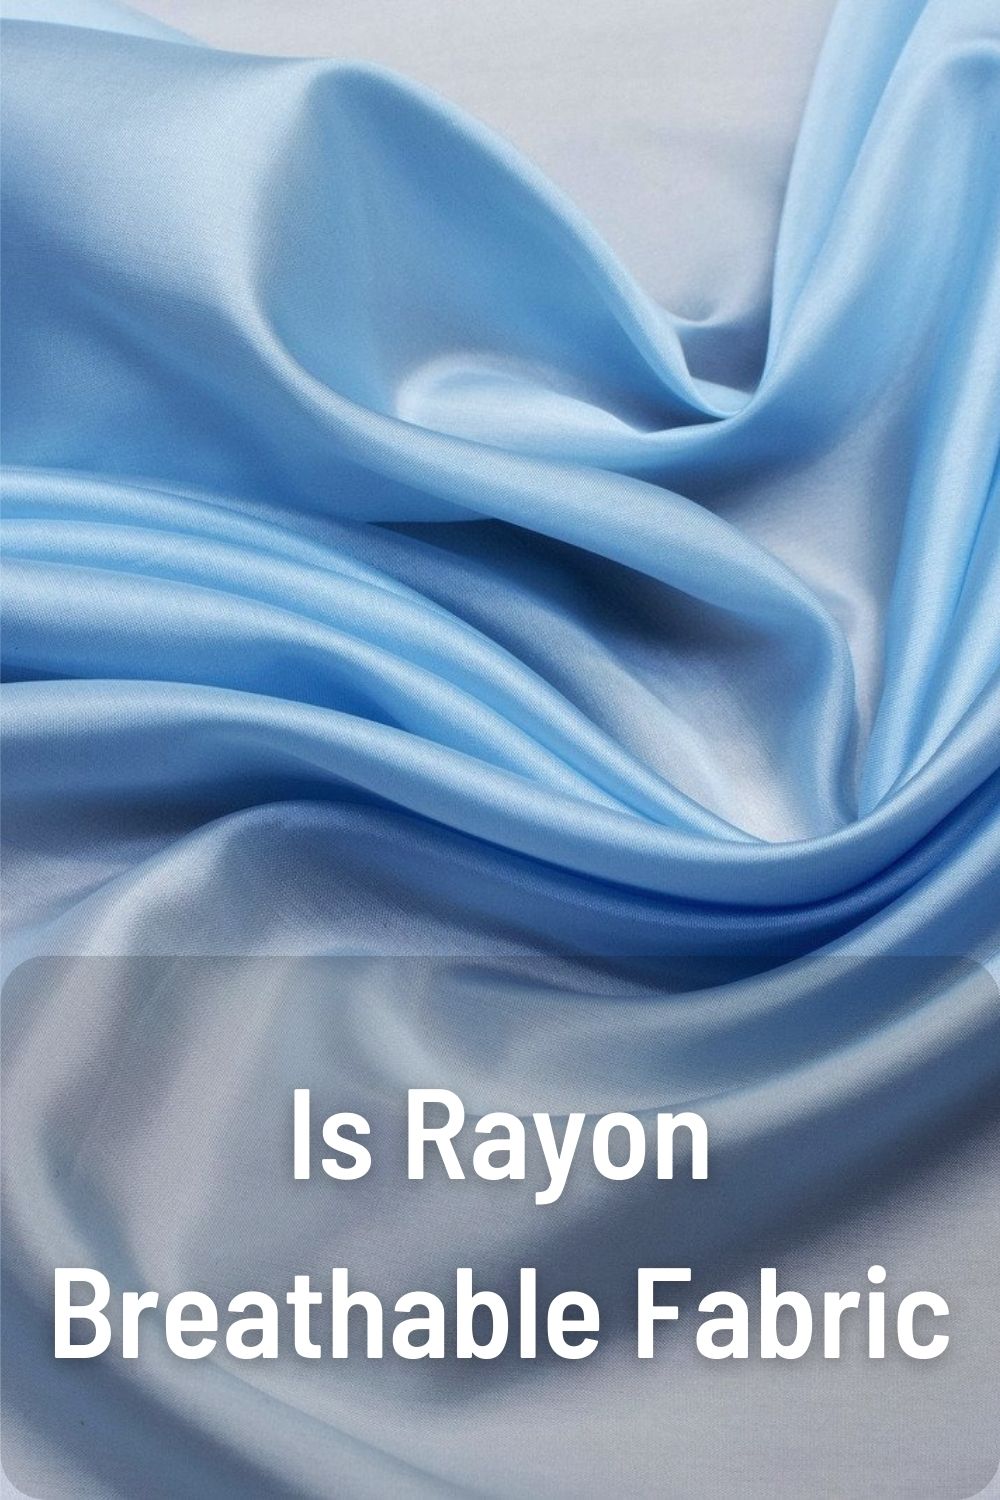 Is Rayon Breathable Fabric